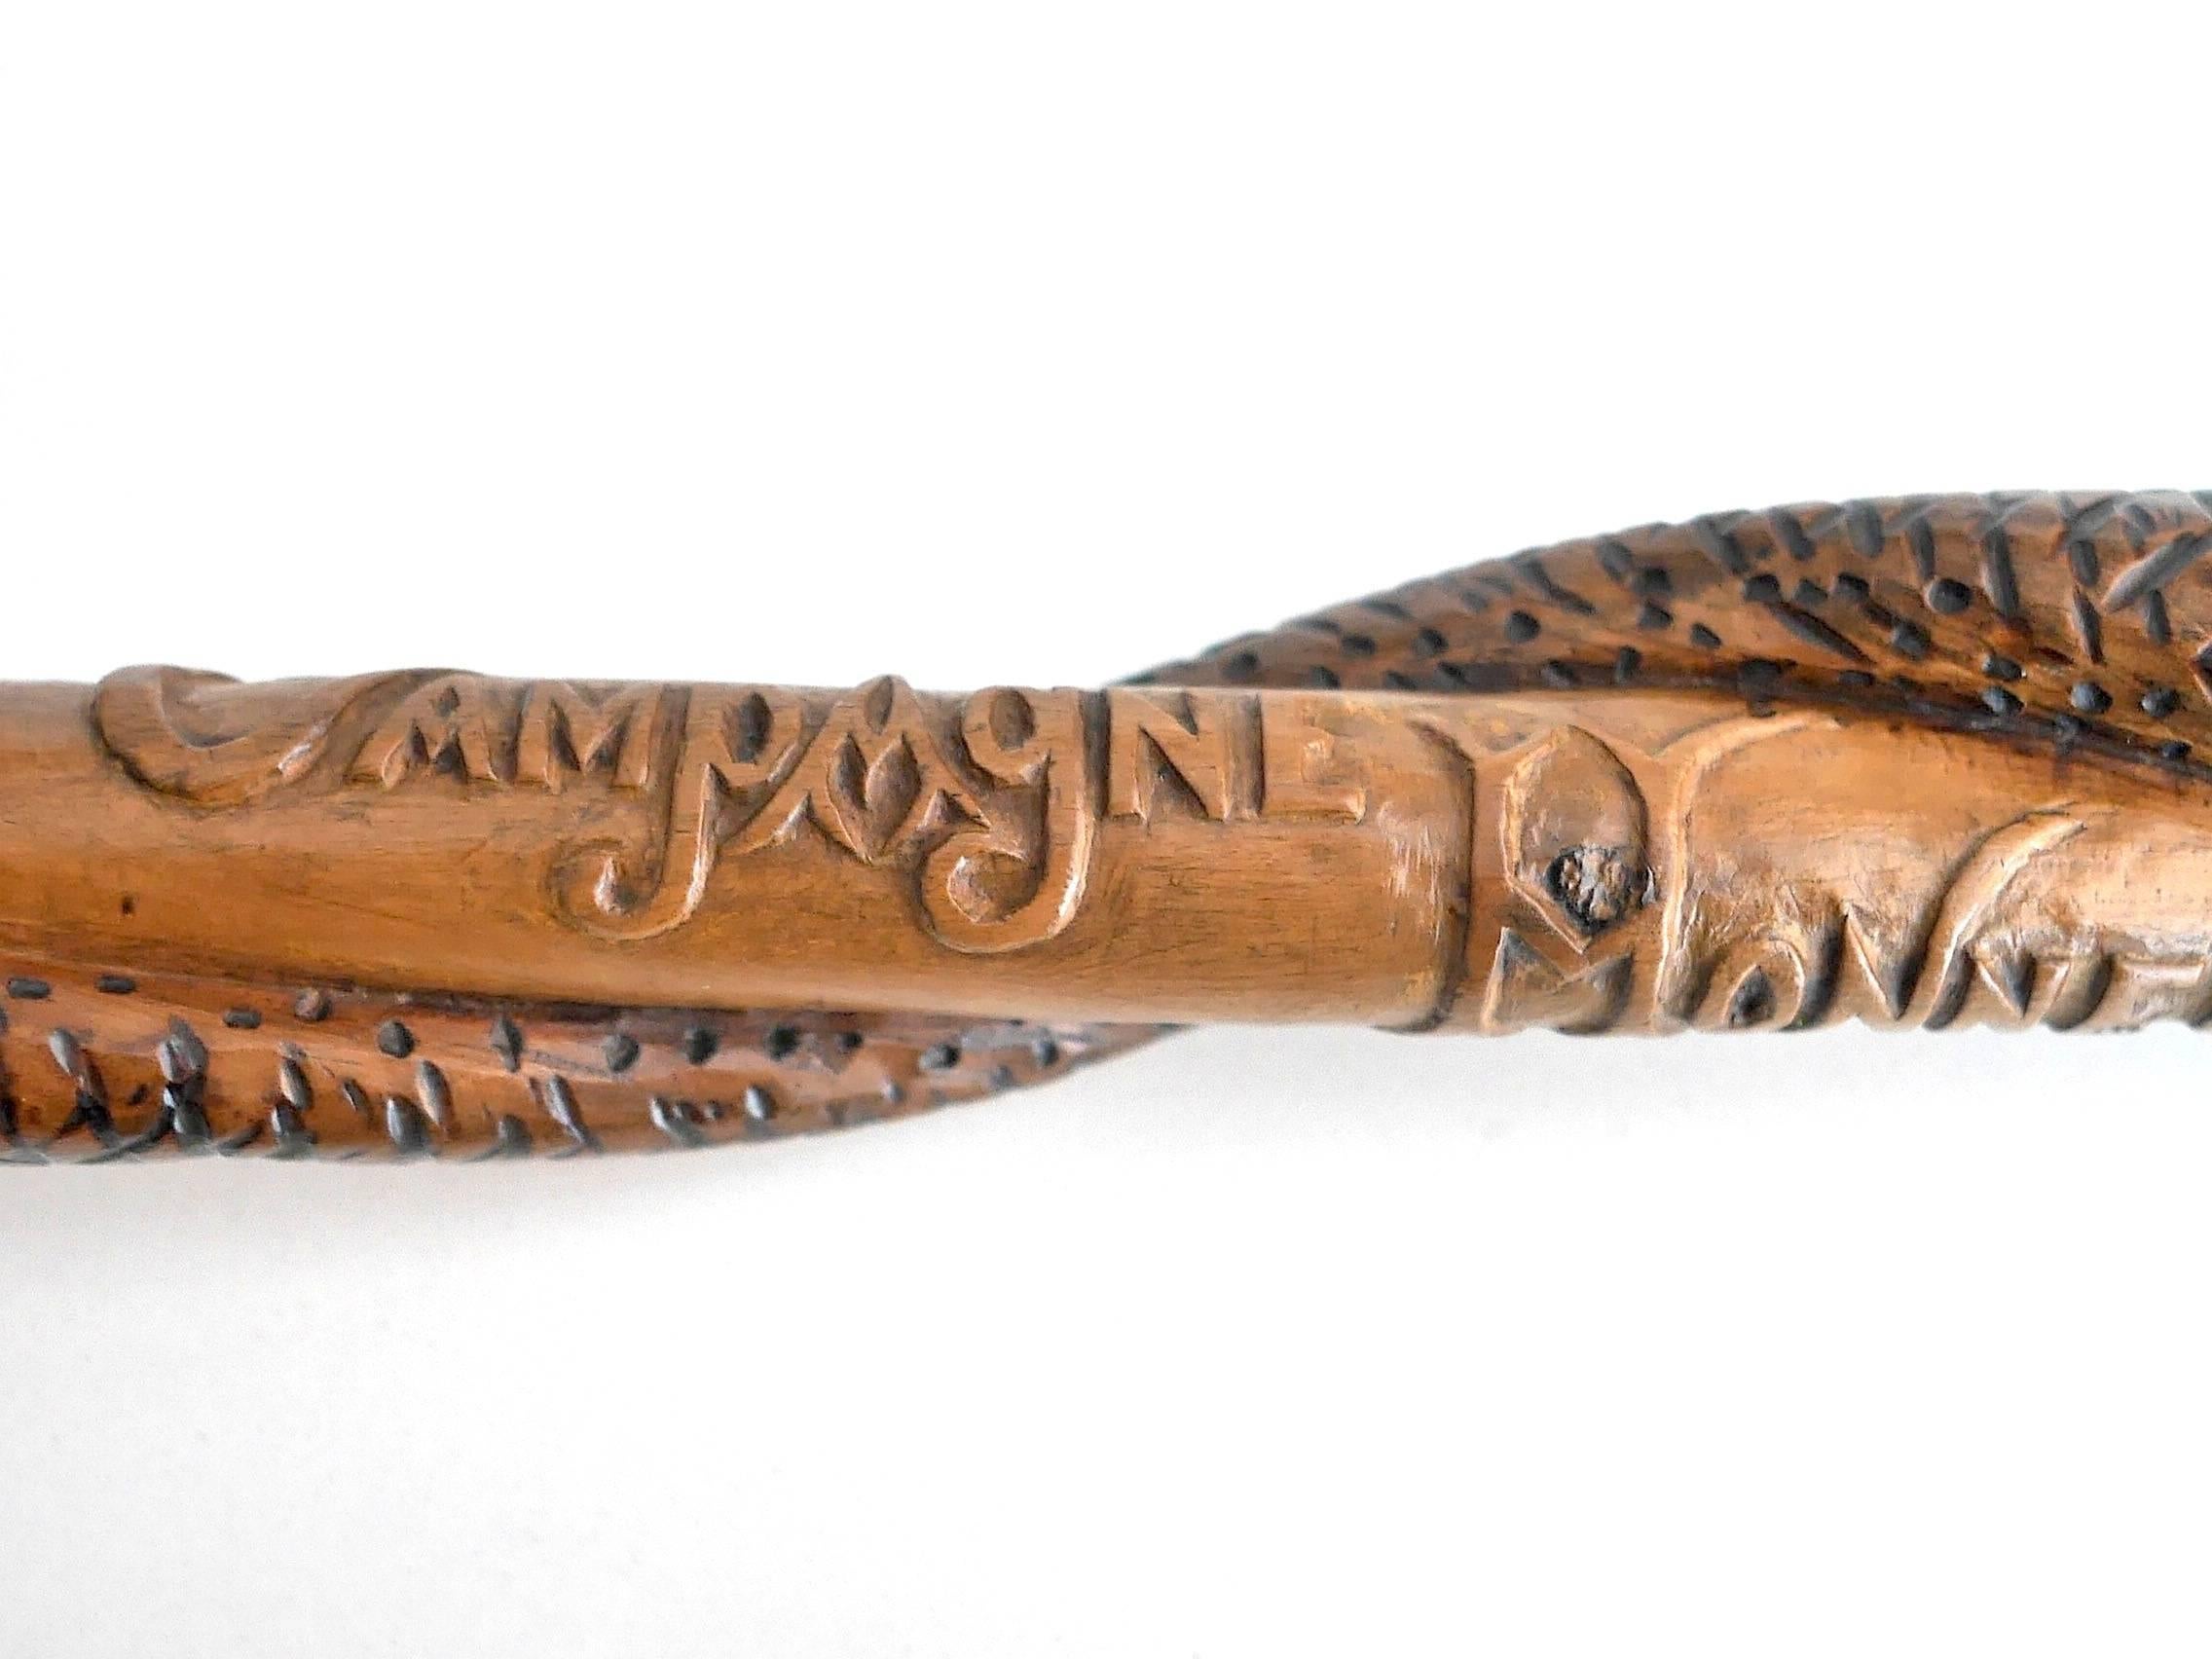 Pear tree cane, featuring on the pommel a soldier's head and an eagle separated in the middle by a skull. The stick is decorated with a snake. Various sentences celebrating the allies are engraved on the sides. Multiples dates 1914-1918 can be seen